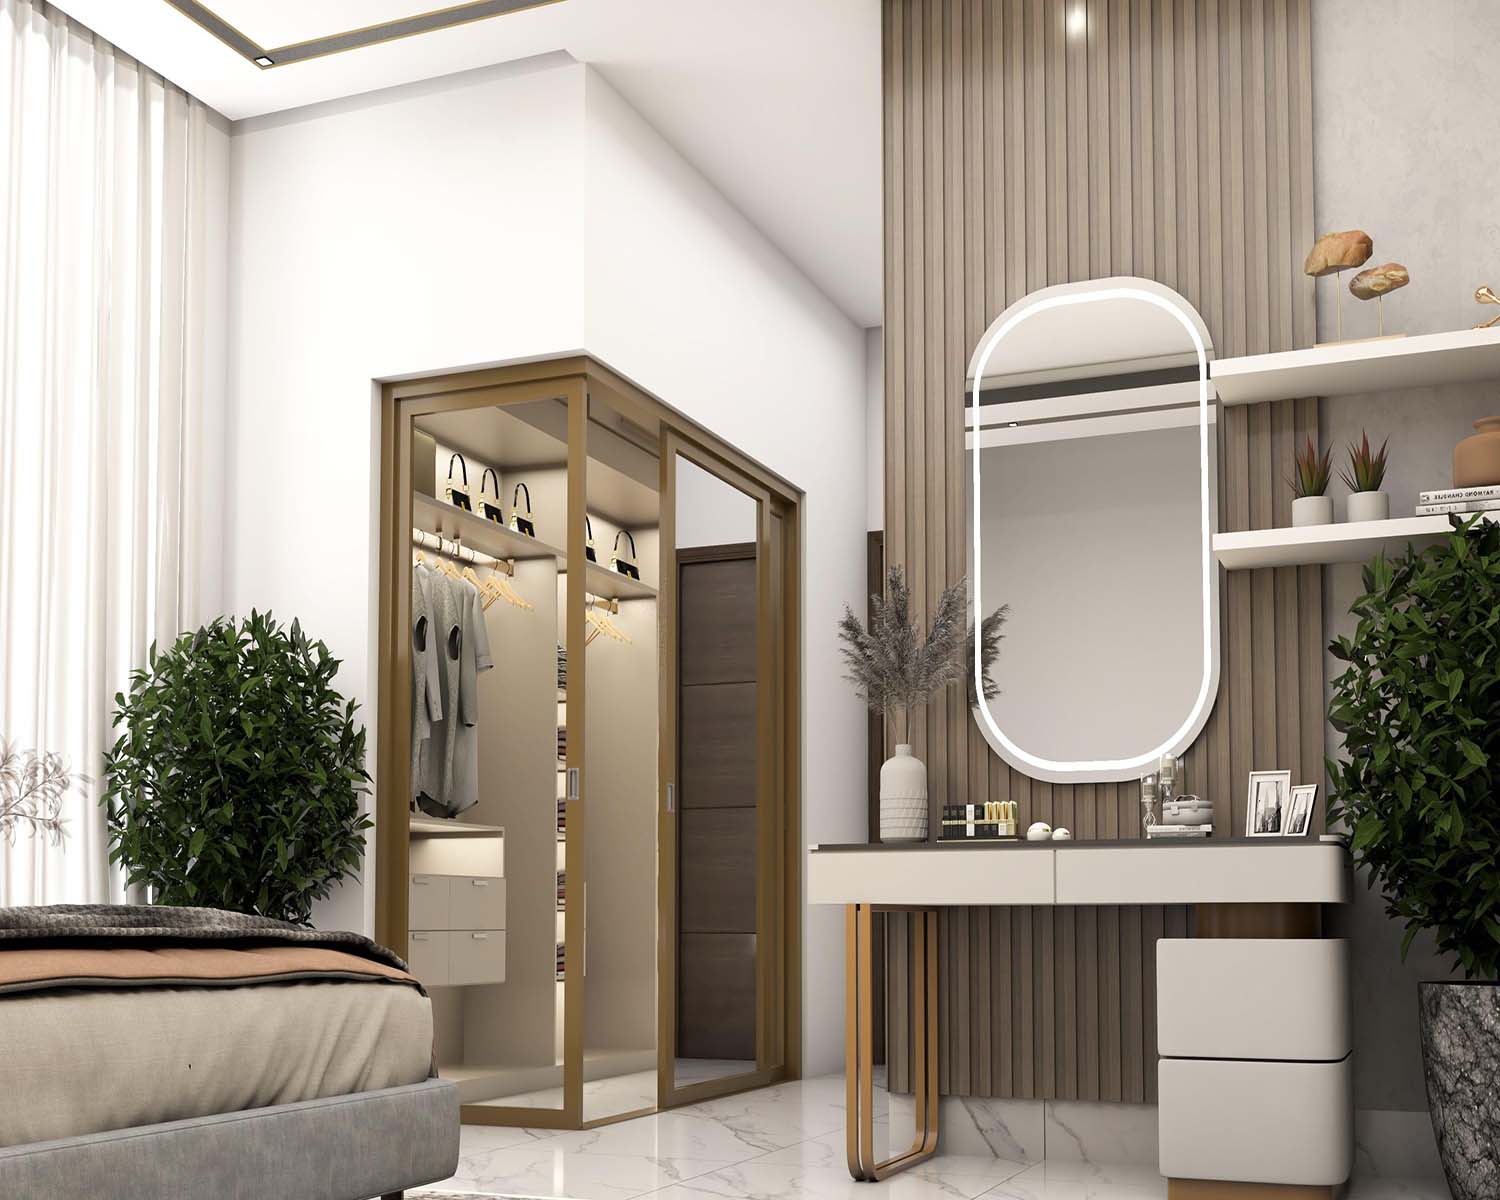 3D model of luxury room in dubai, placed a dressing table next to glass closet